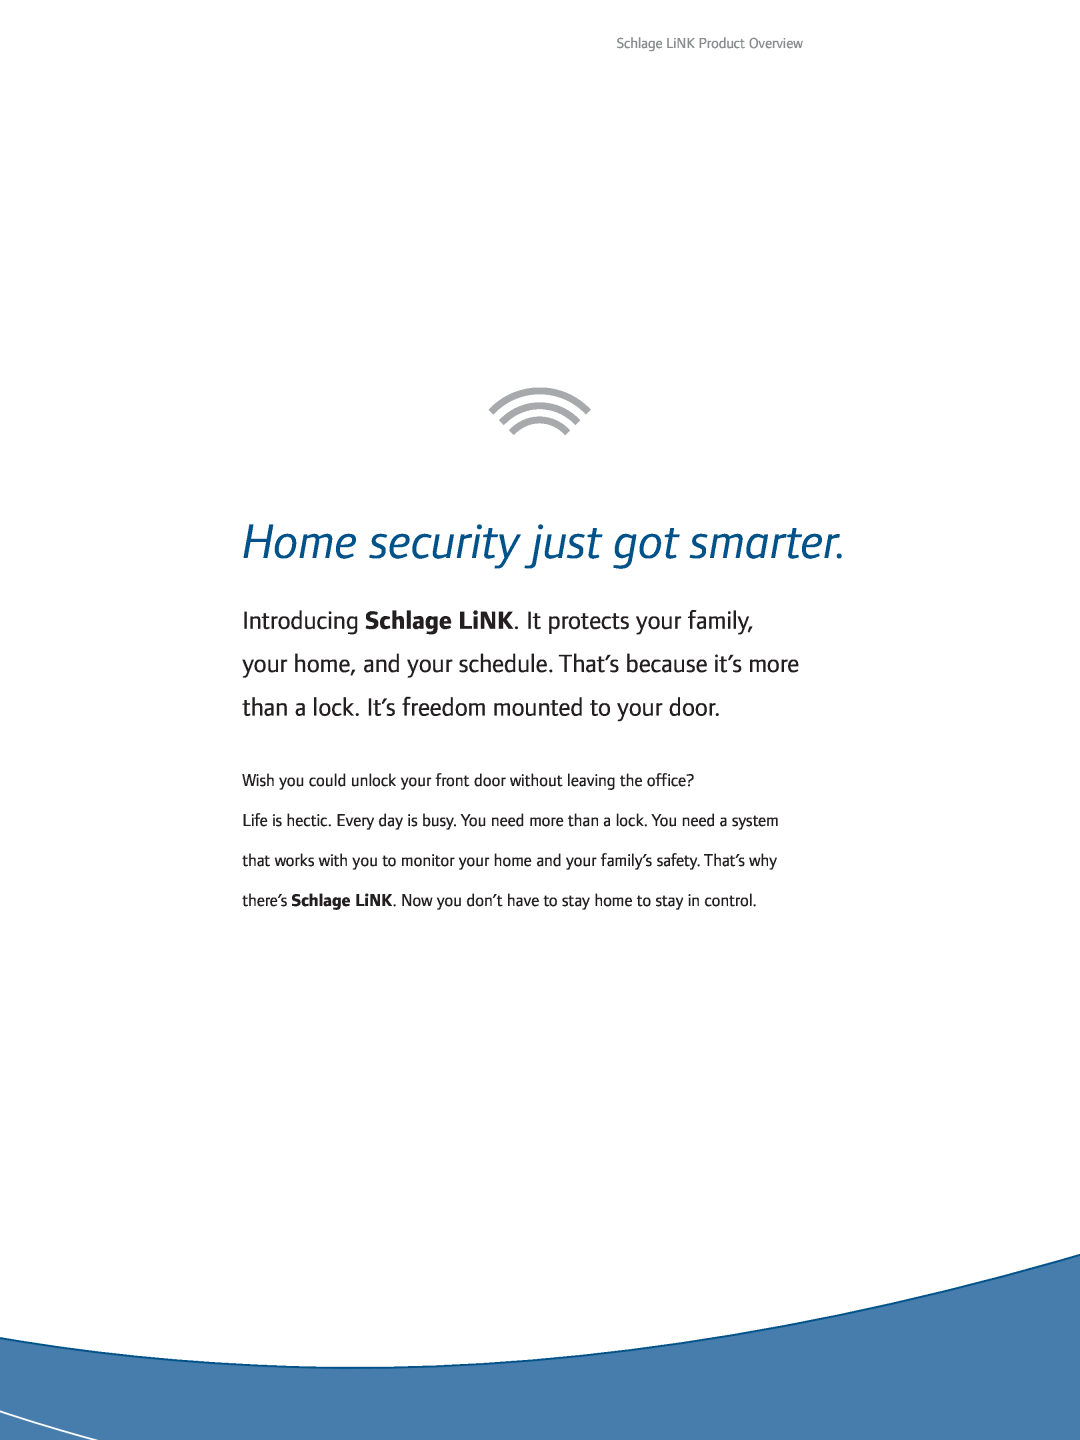 Ingersoll-Rand 1-877-288-7707 manual Home security just got smarter, Schlage LiNK Product Overview 